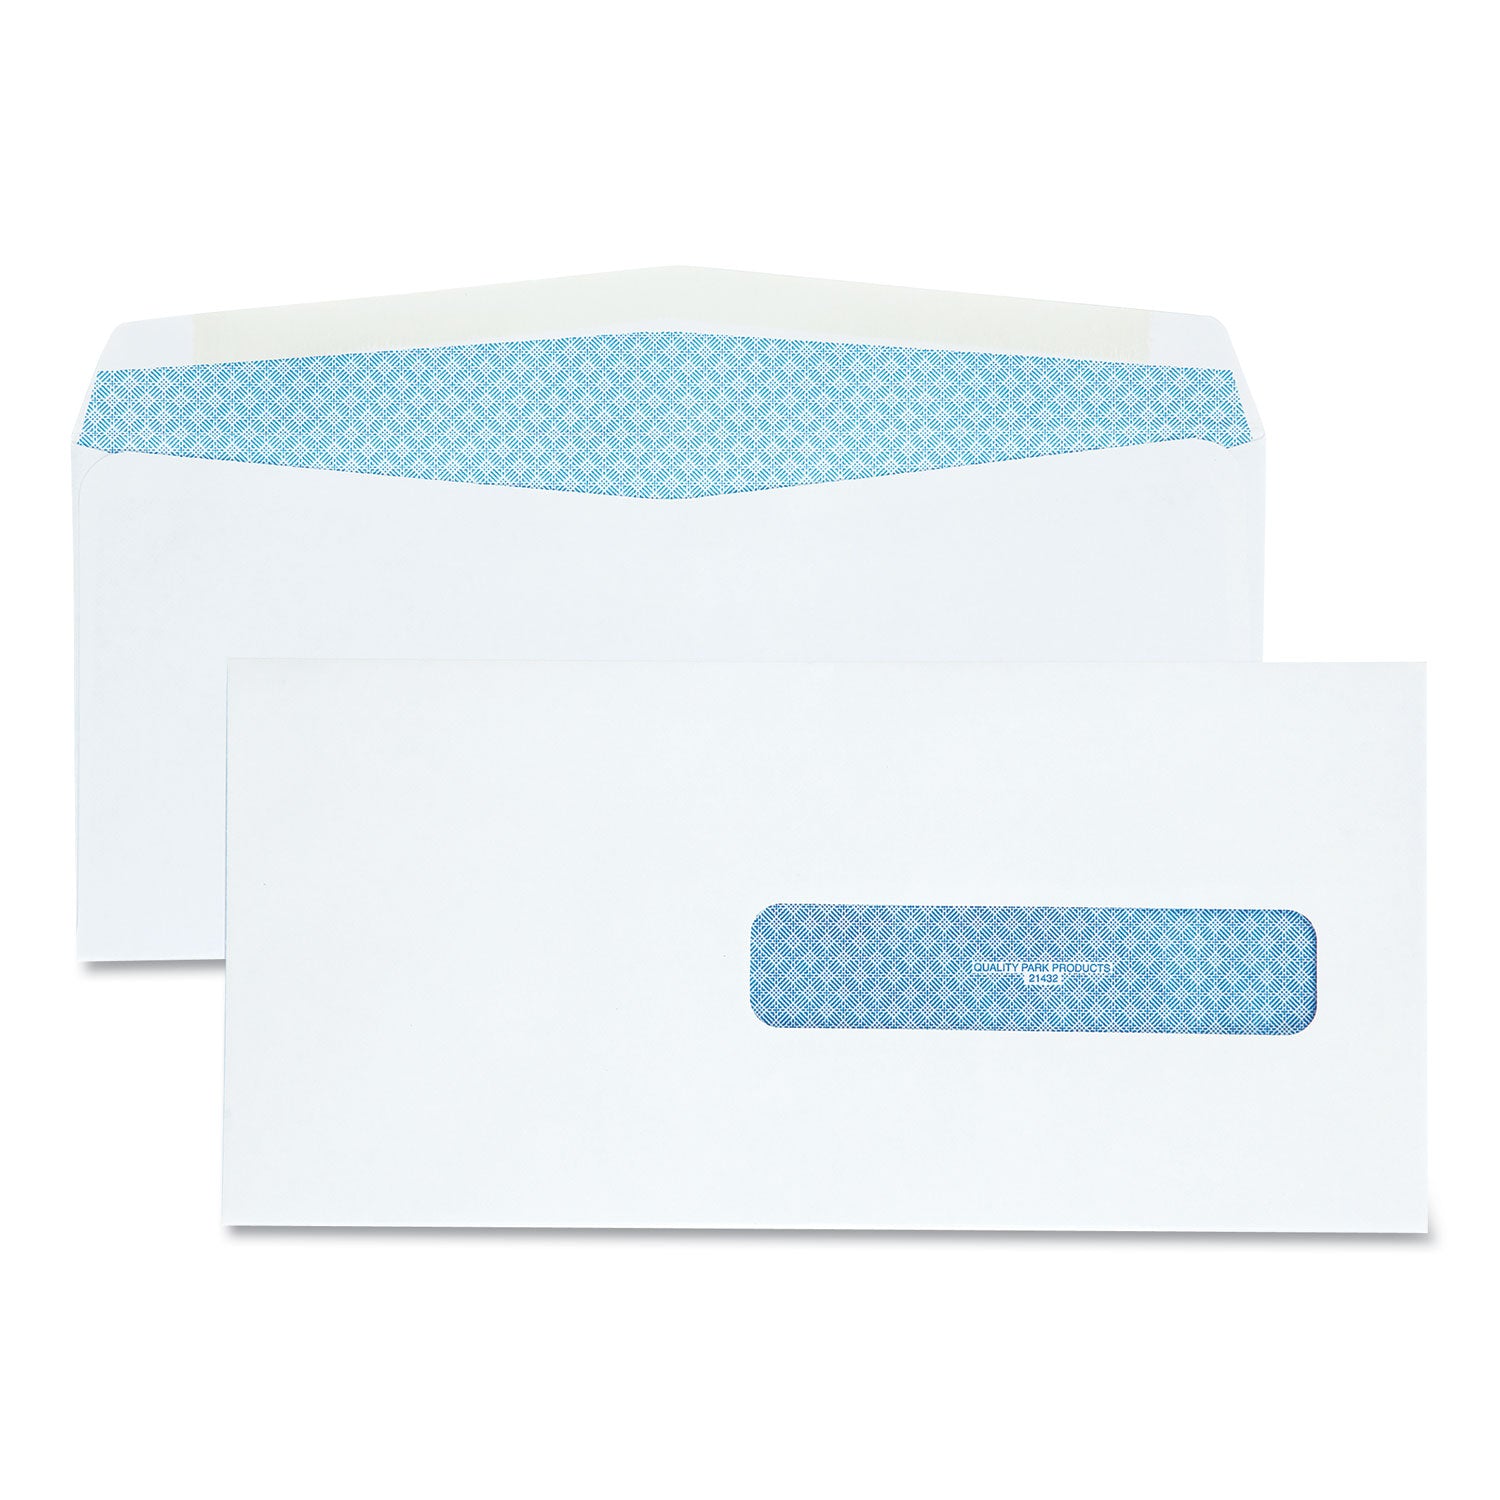 Security Tinted Insurance Claim Form Envelope, Address Window, Commercial Flap, Gummed Closure, 4.5 x 9.5, White, 500/Box - 